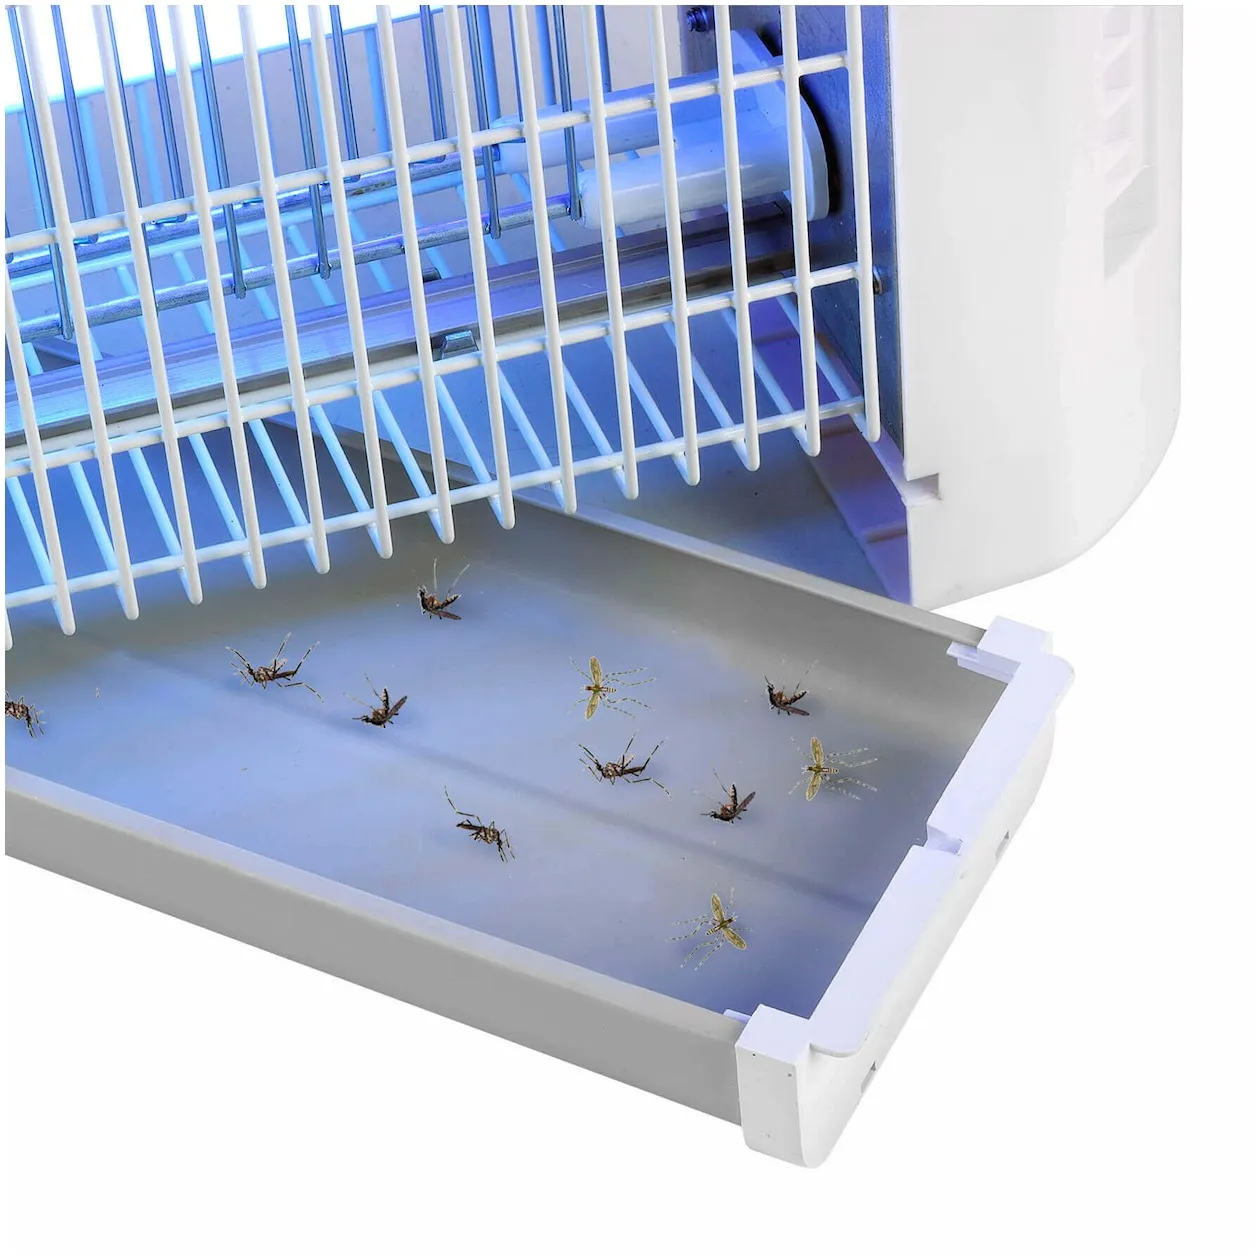 Eurom Fly Away All-round 16 Insect killer